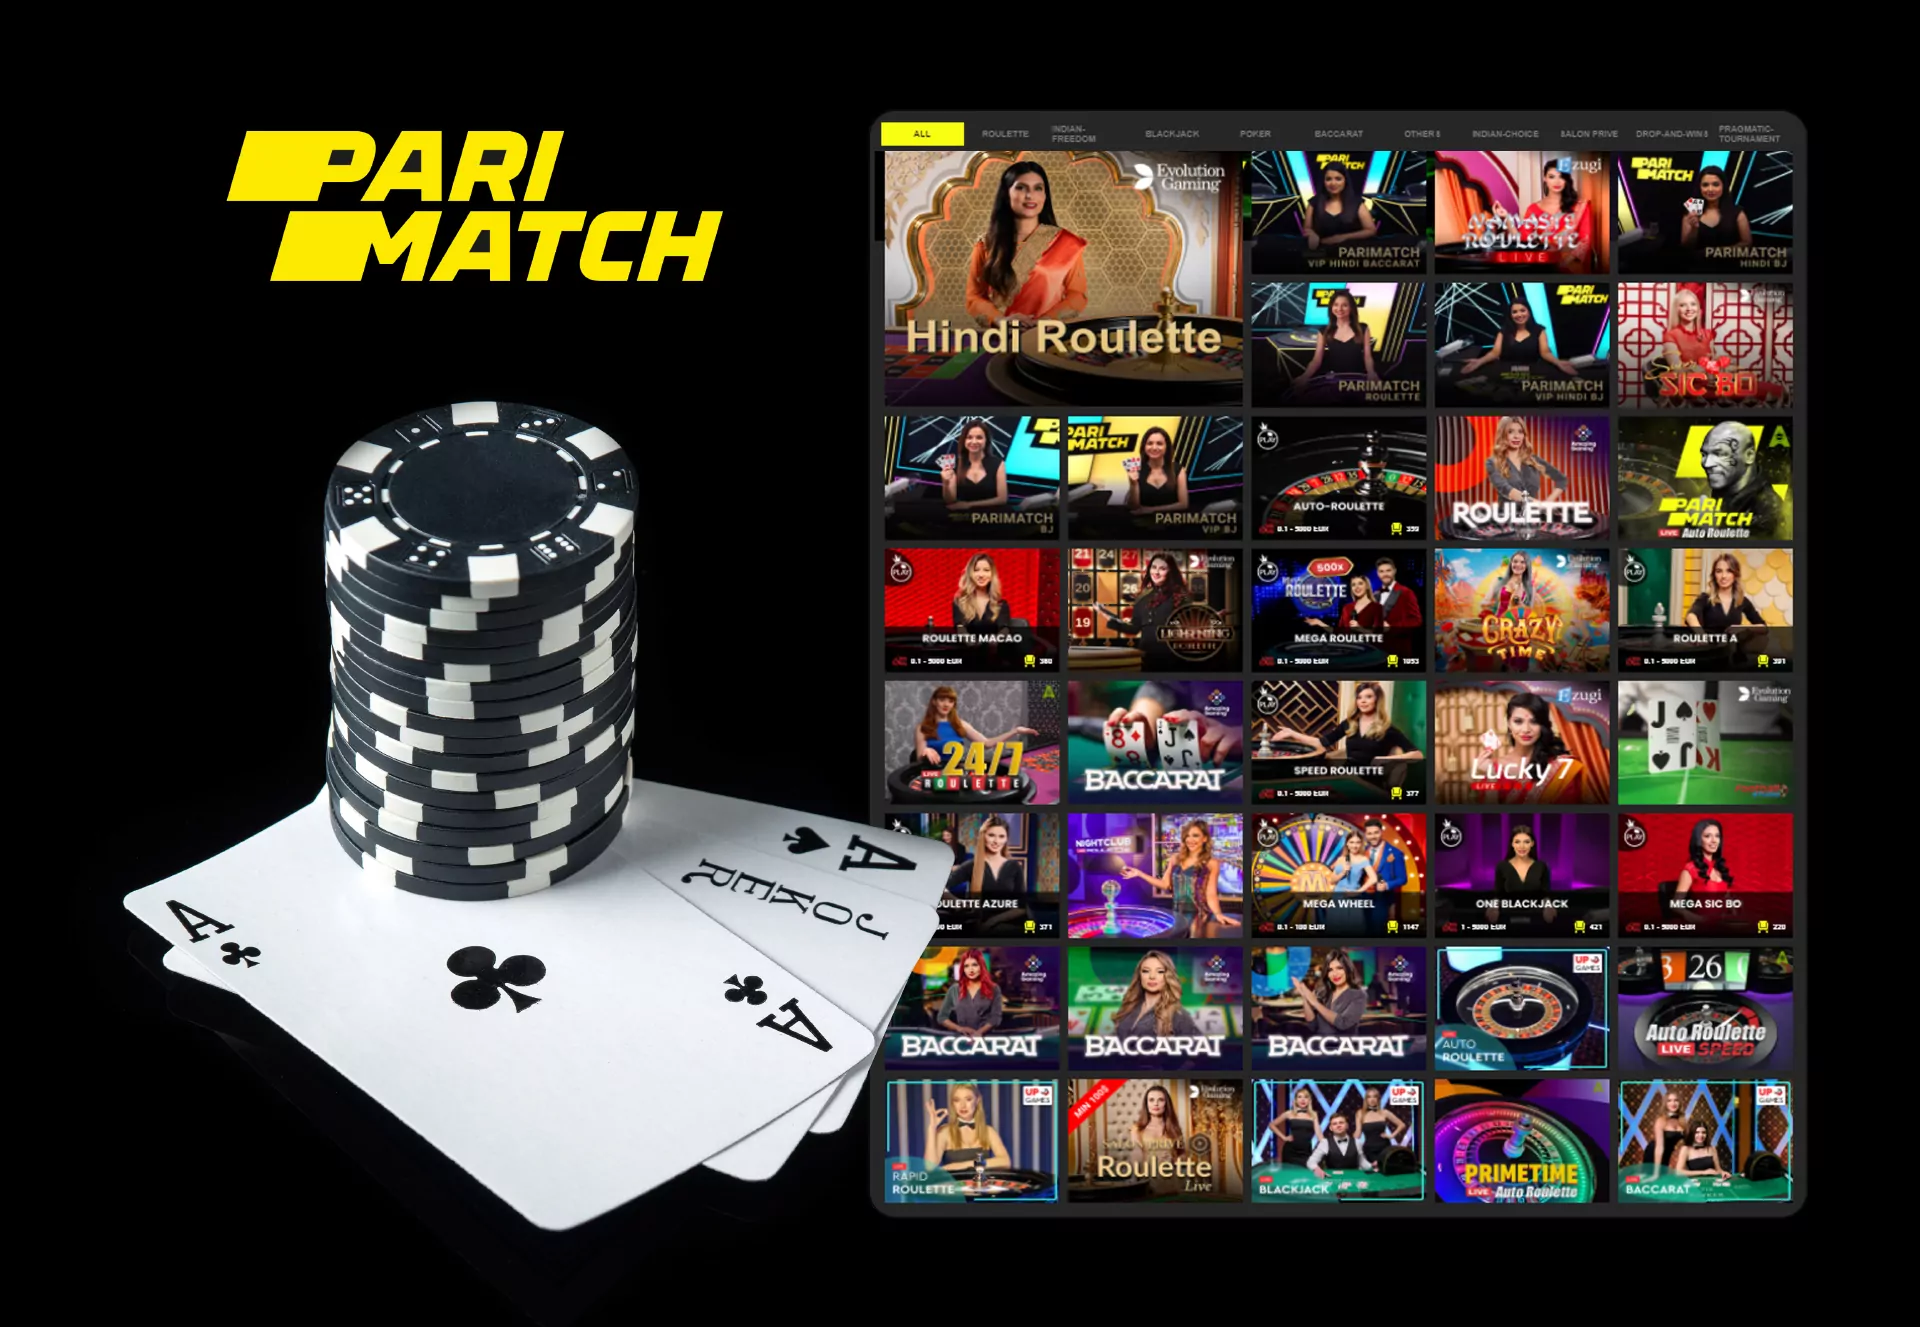 If you also like playing games, visit the section of Parimatch Casino.